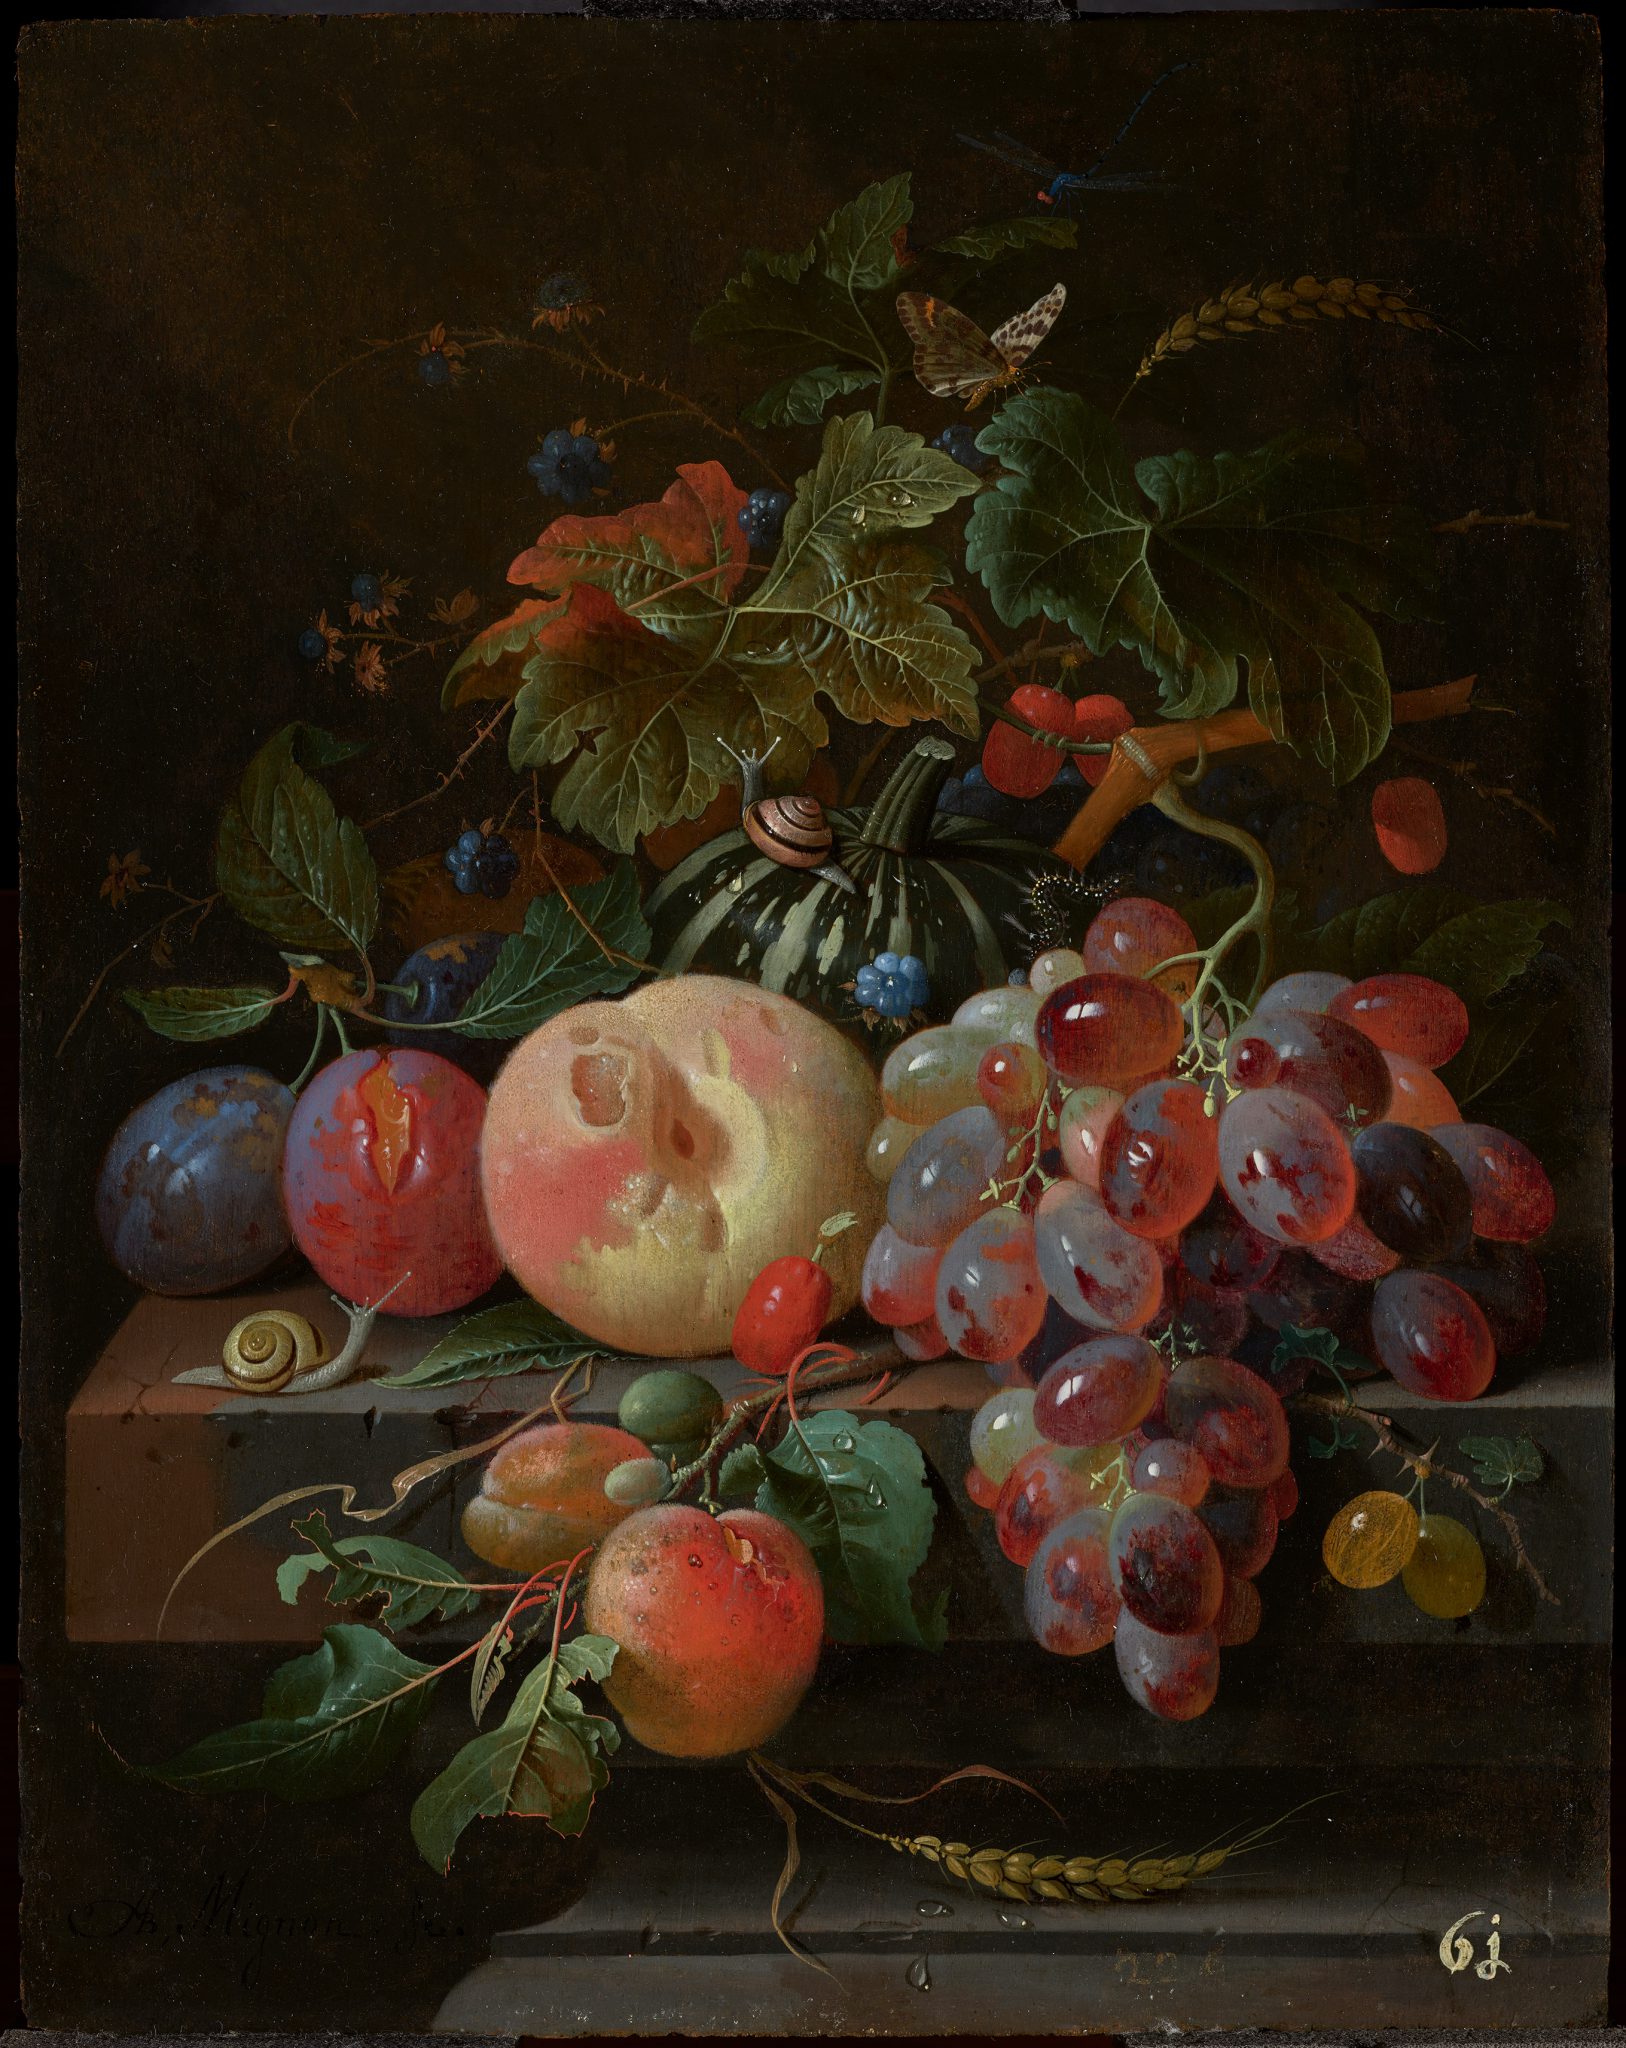 Still life with a Pumpkin, Peach, Grapes and Insects